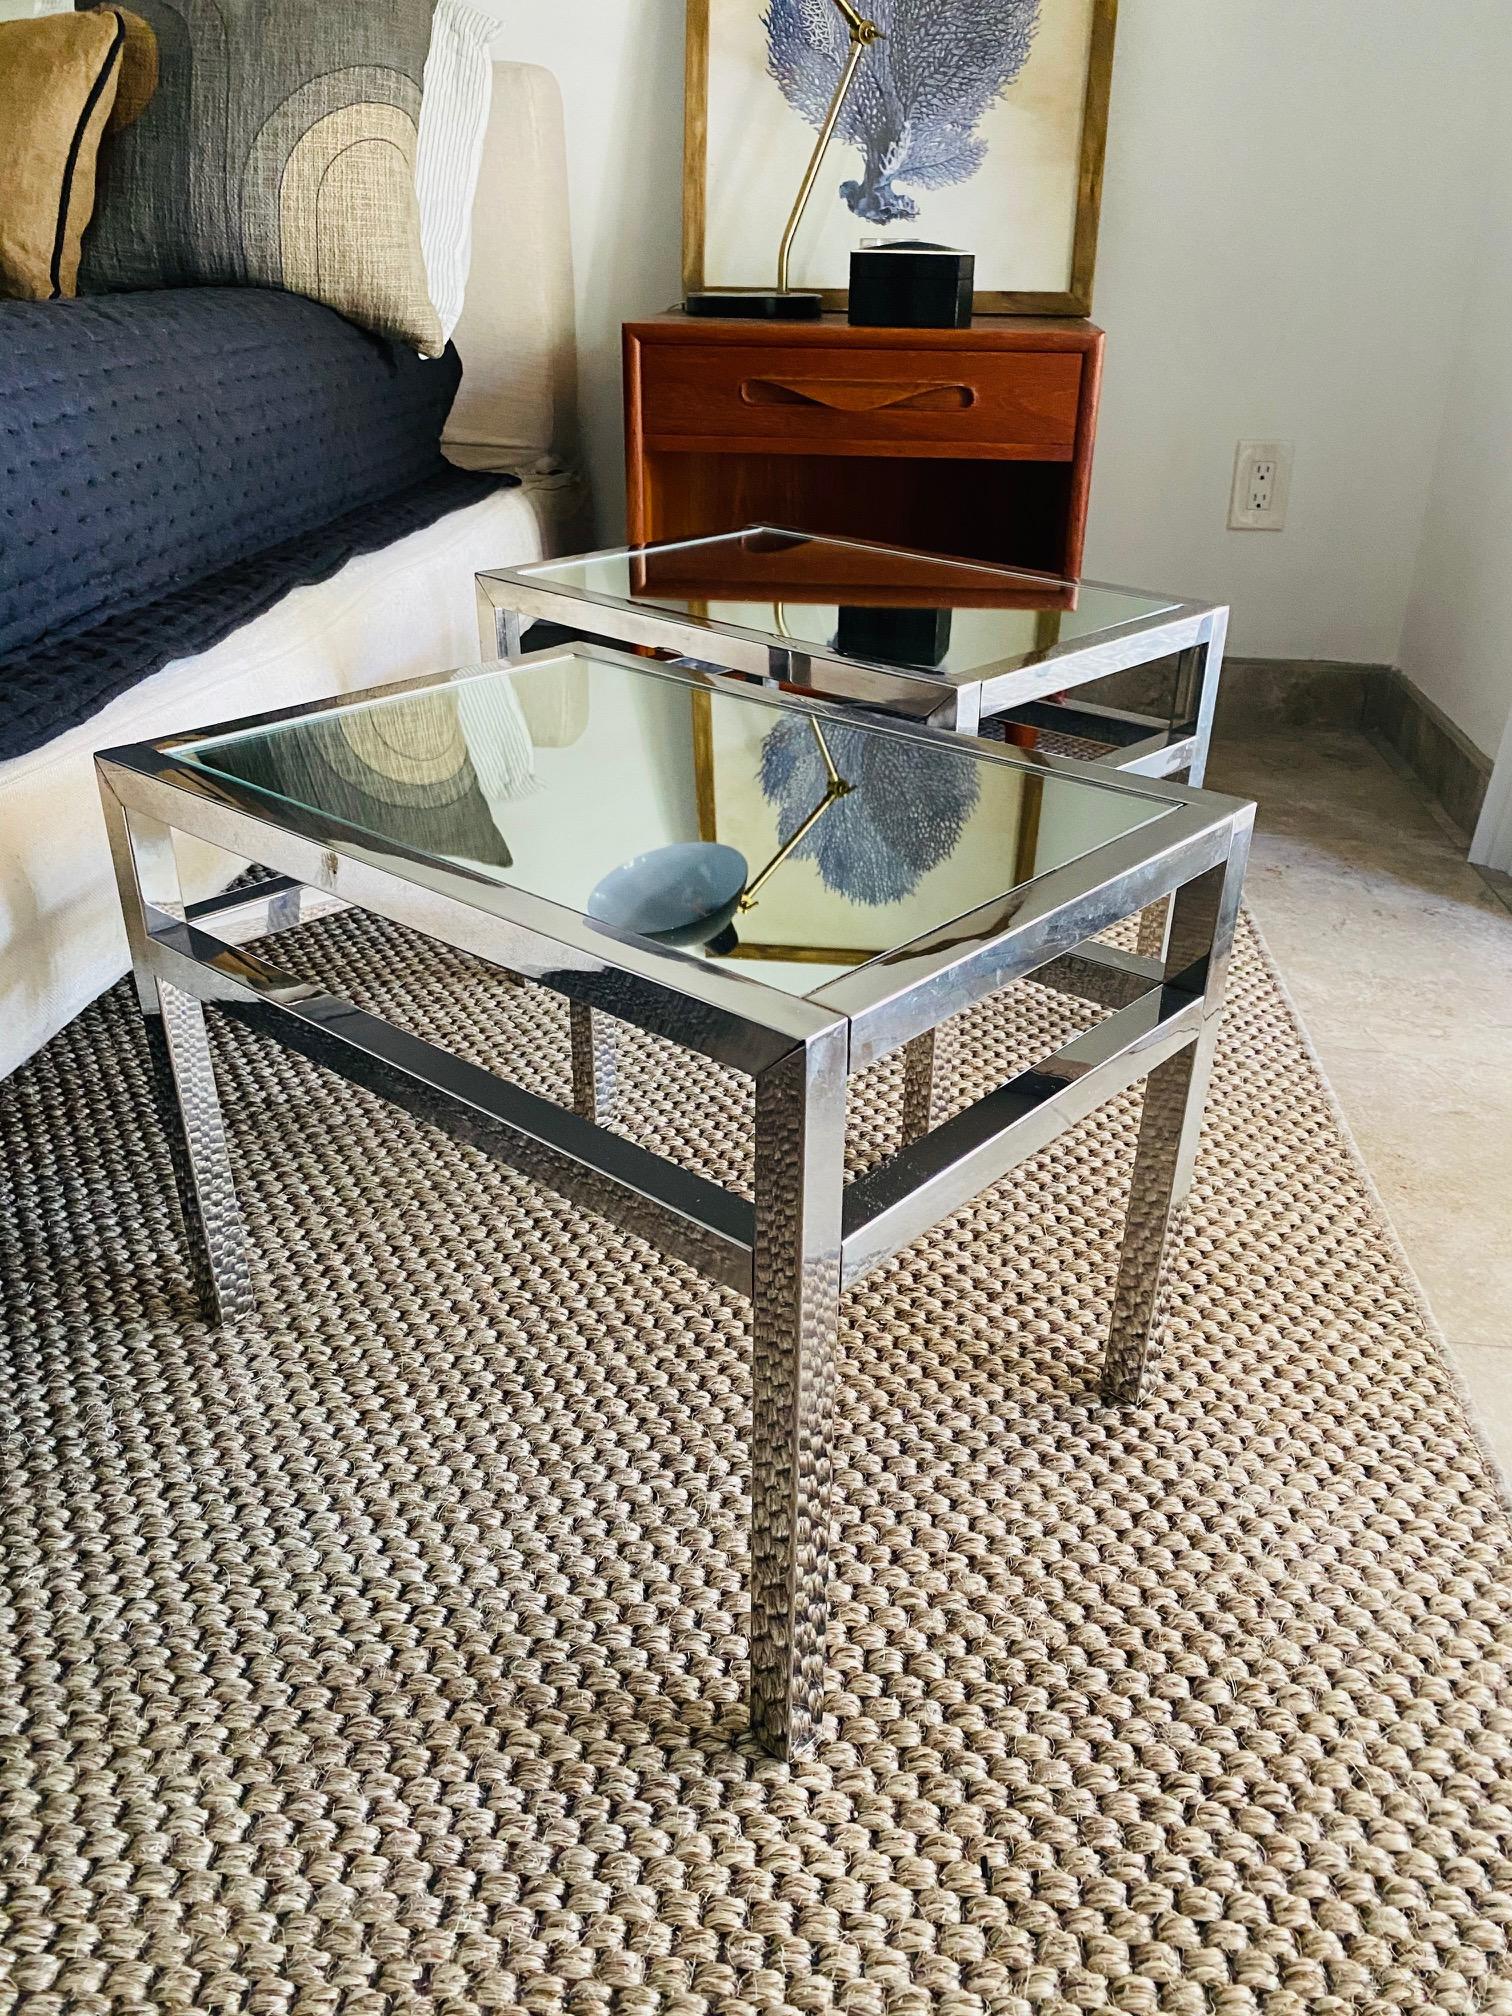 Pair of Italian Mid-Century Modern small side tables with industrial style frames. The tables have minimalist rectangular frames featuring double crossbar design in chrome metal fitted with mirrored tops. Streamline design makes these an elegant